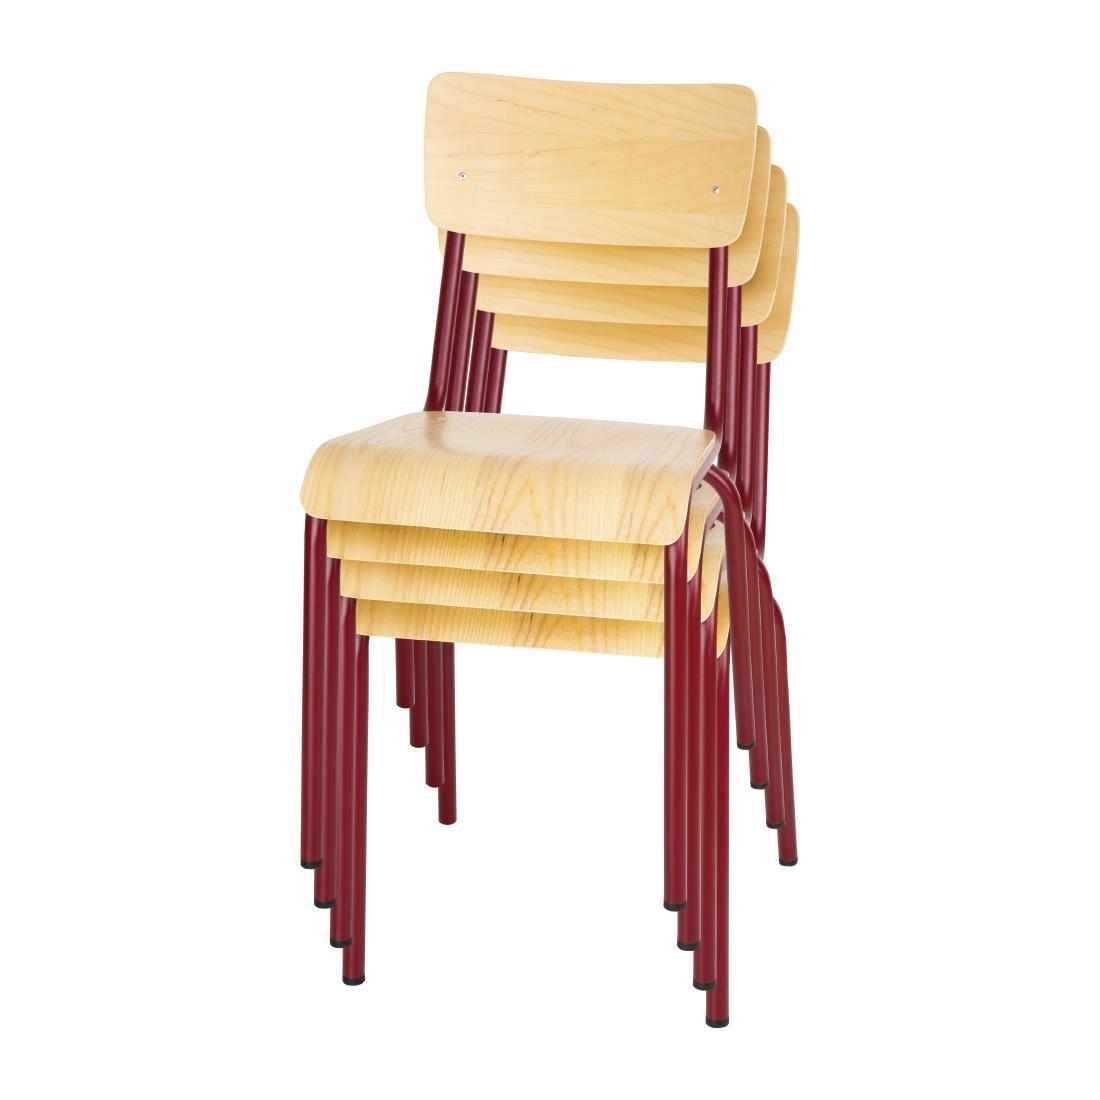 Bolero Cantina Side Chairs with Wooden Seat Pad and Backrest Wine Red (Pack of 4) - FB943  - 5